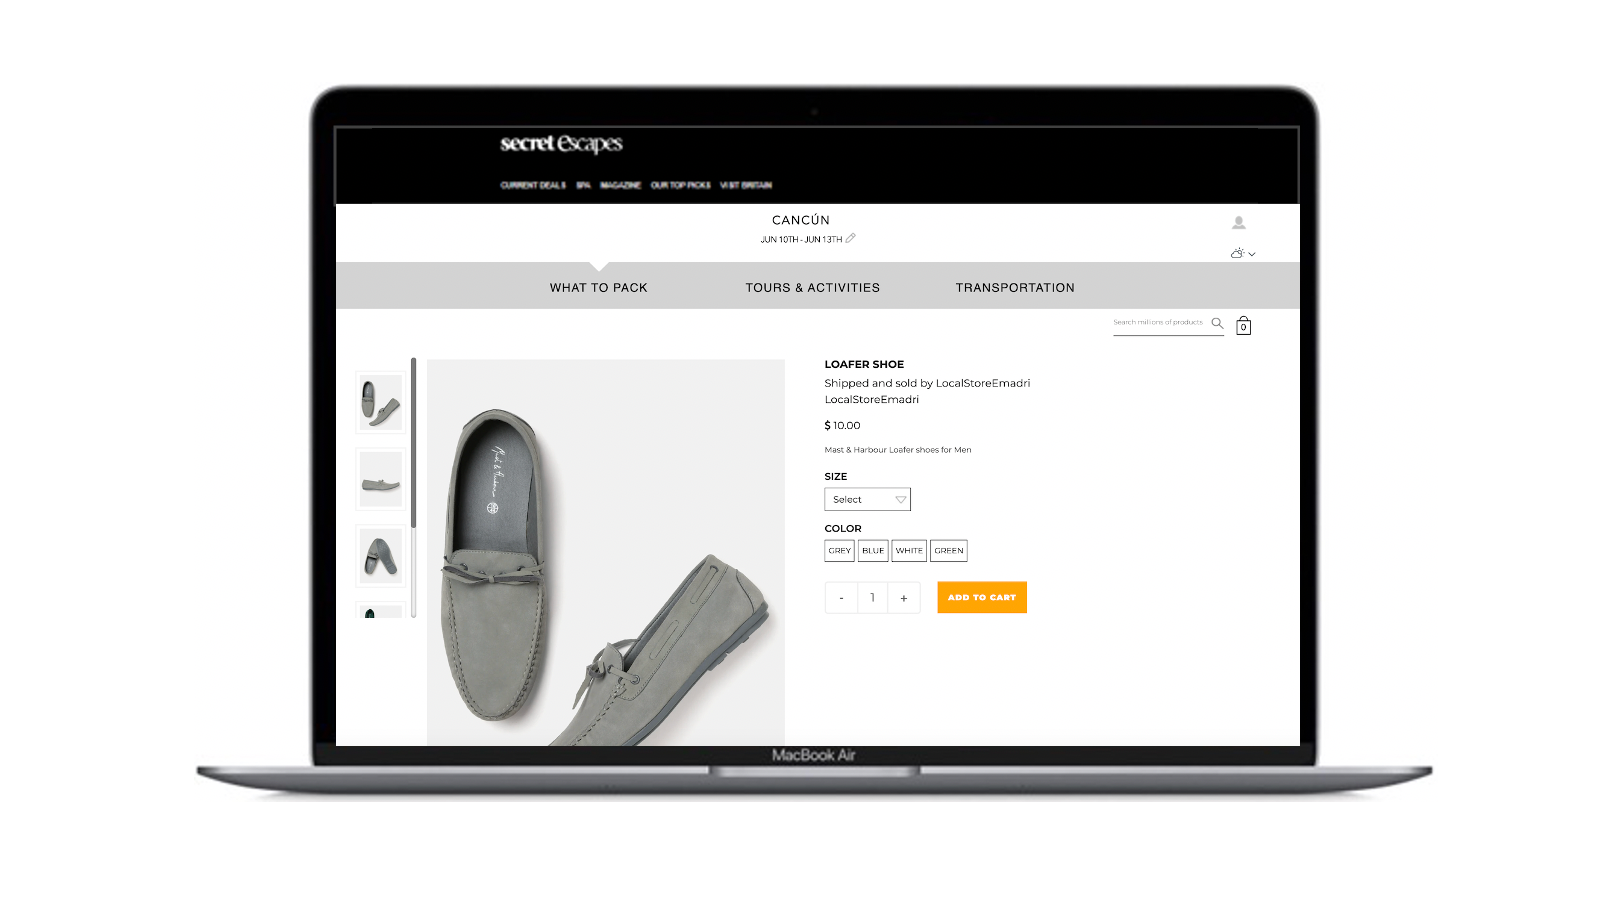 Product detail page in Emadri marketplace ready to add to cart